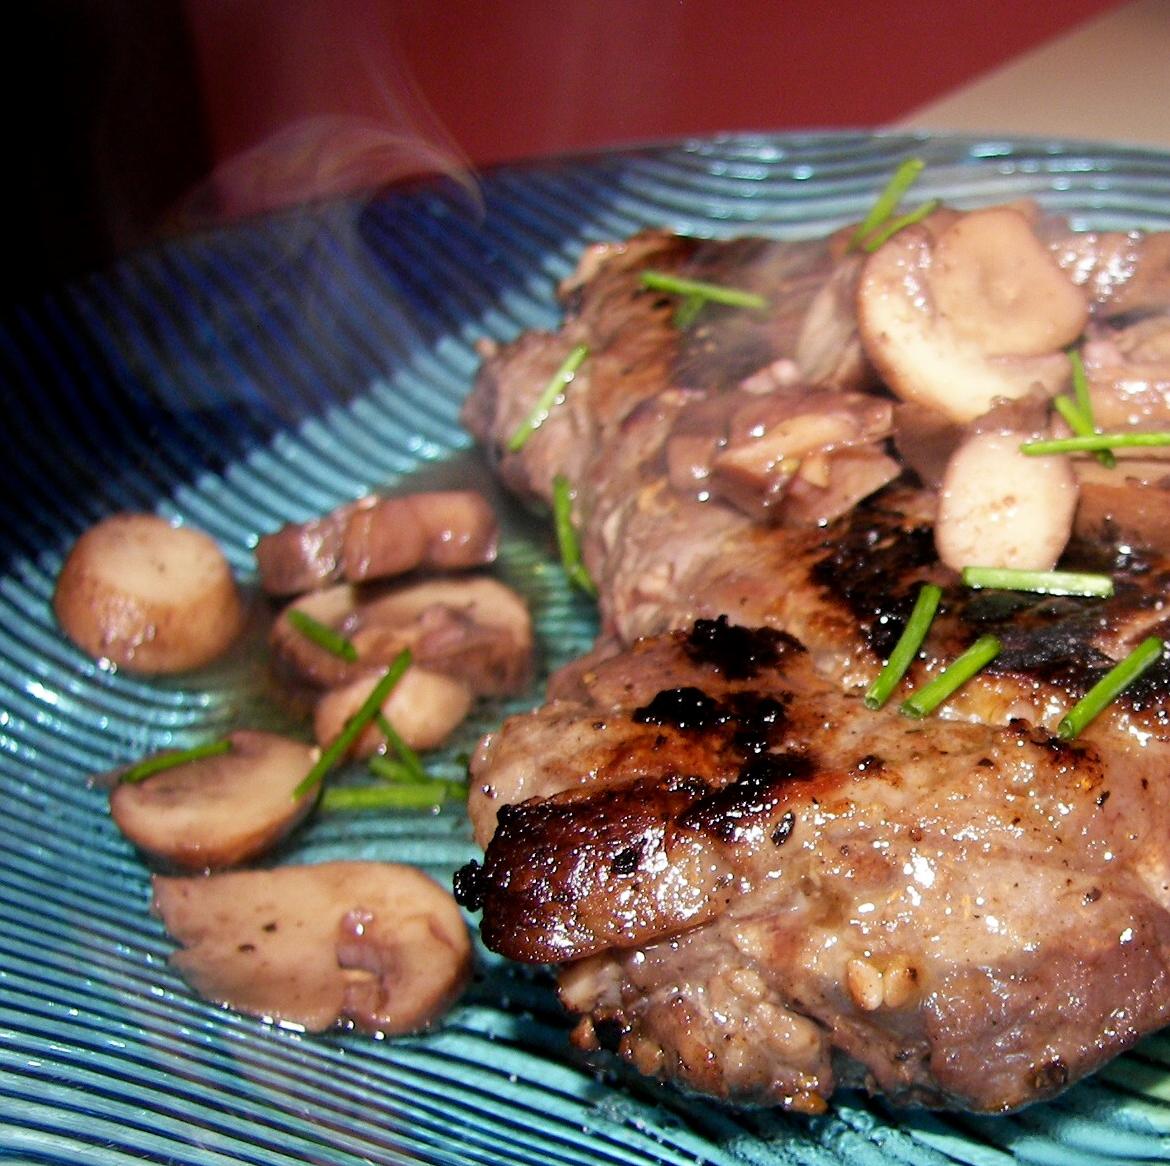  Celebrate the weekend with this delightful recipe of red wine steak and mushrooms.